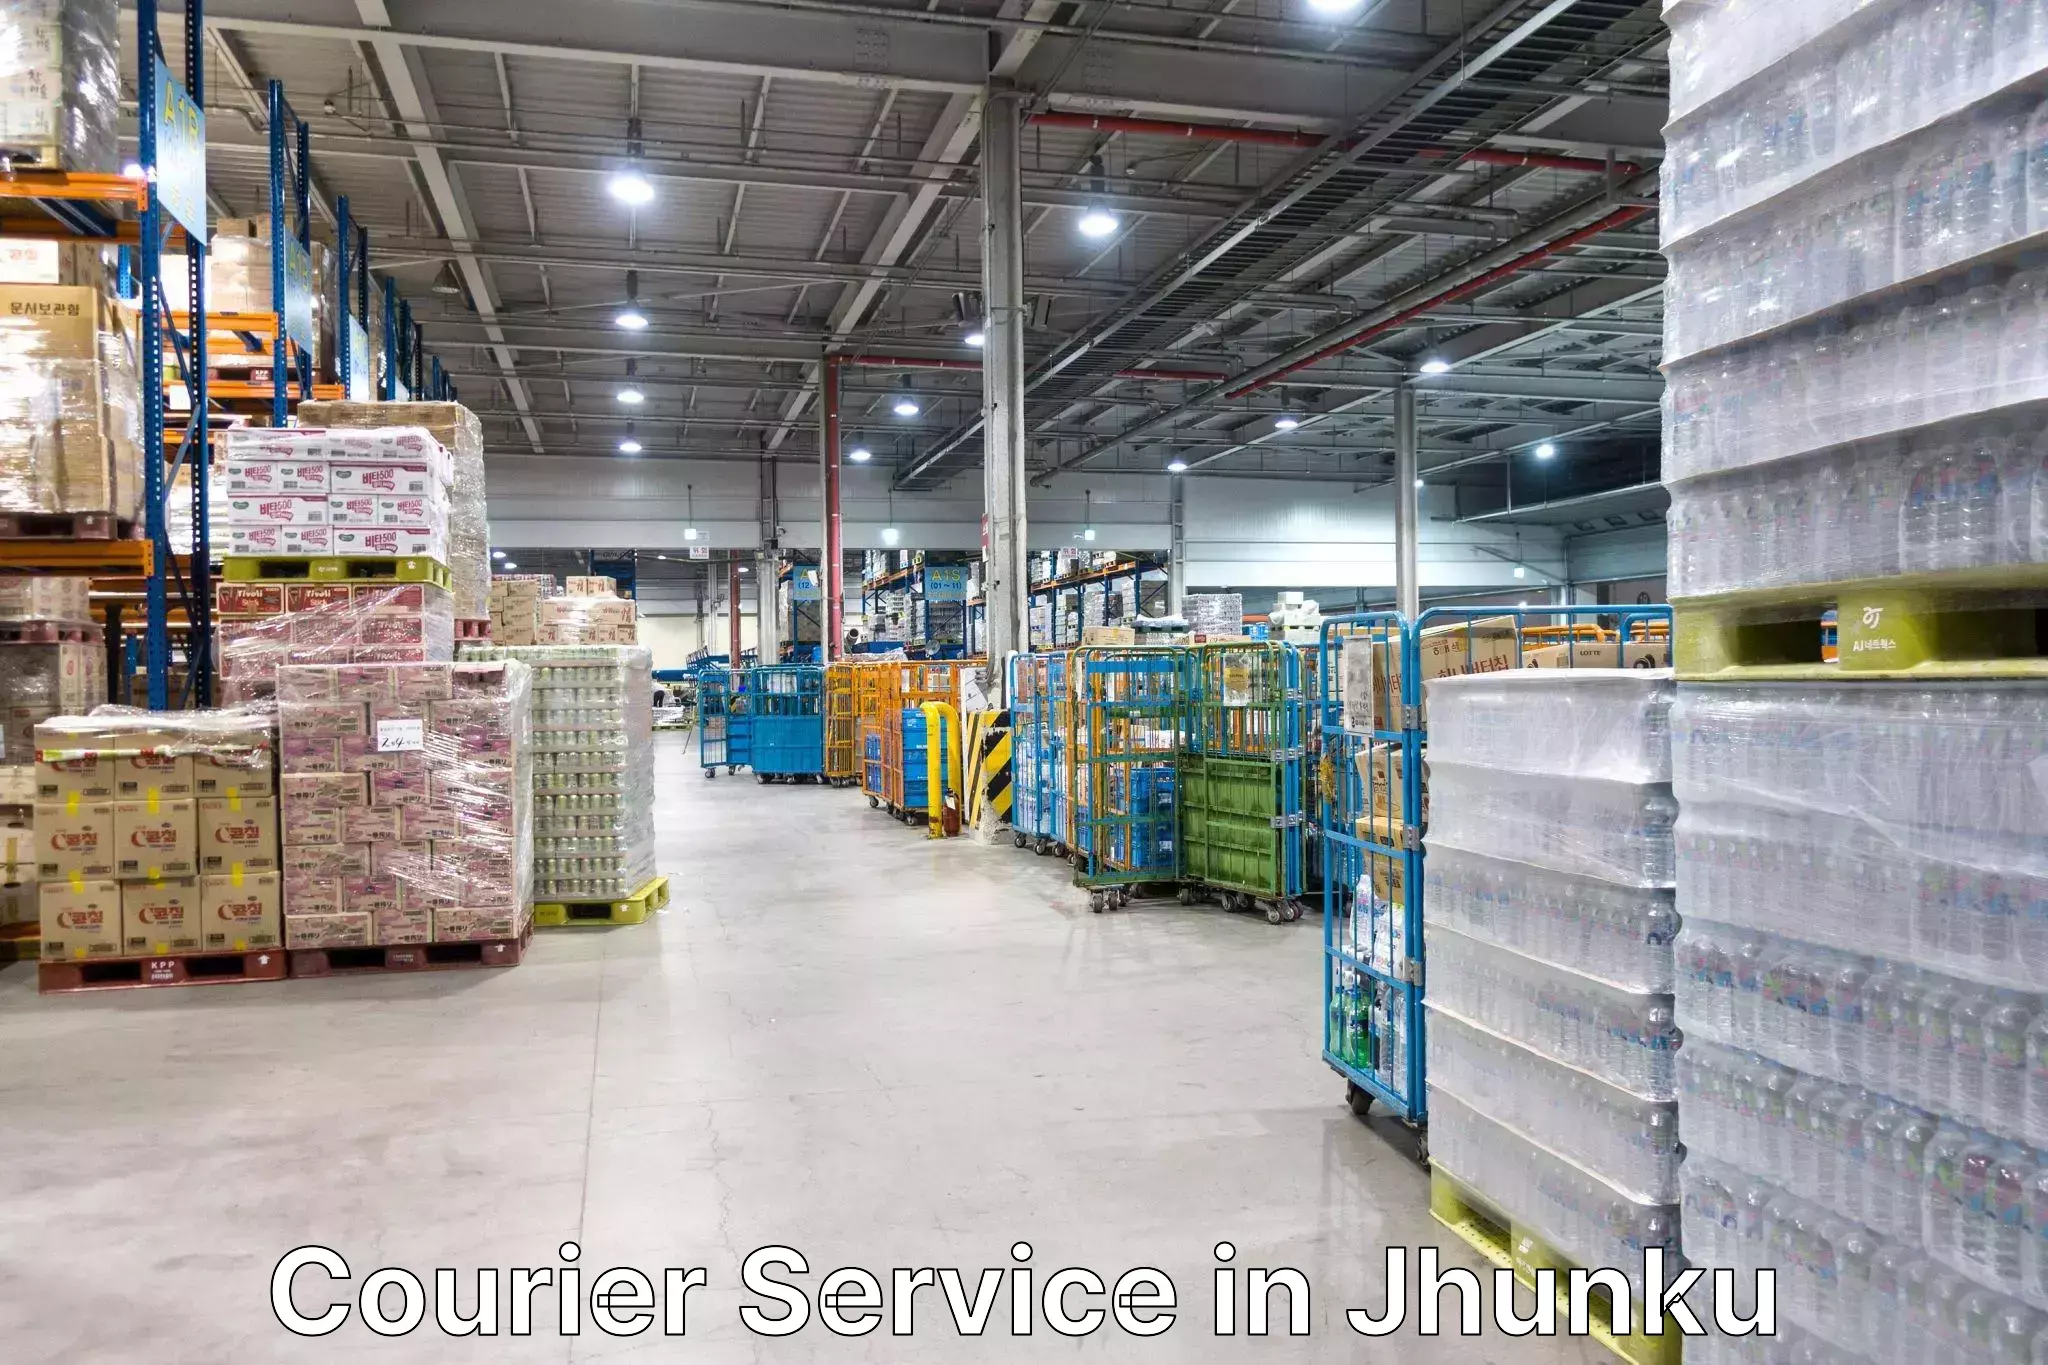 24-hour courier service in Jhunku